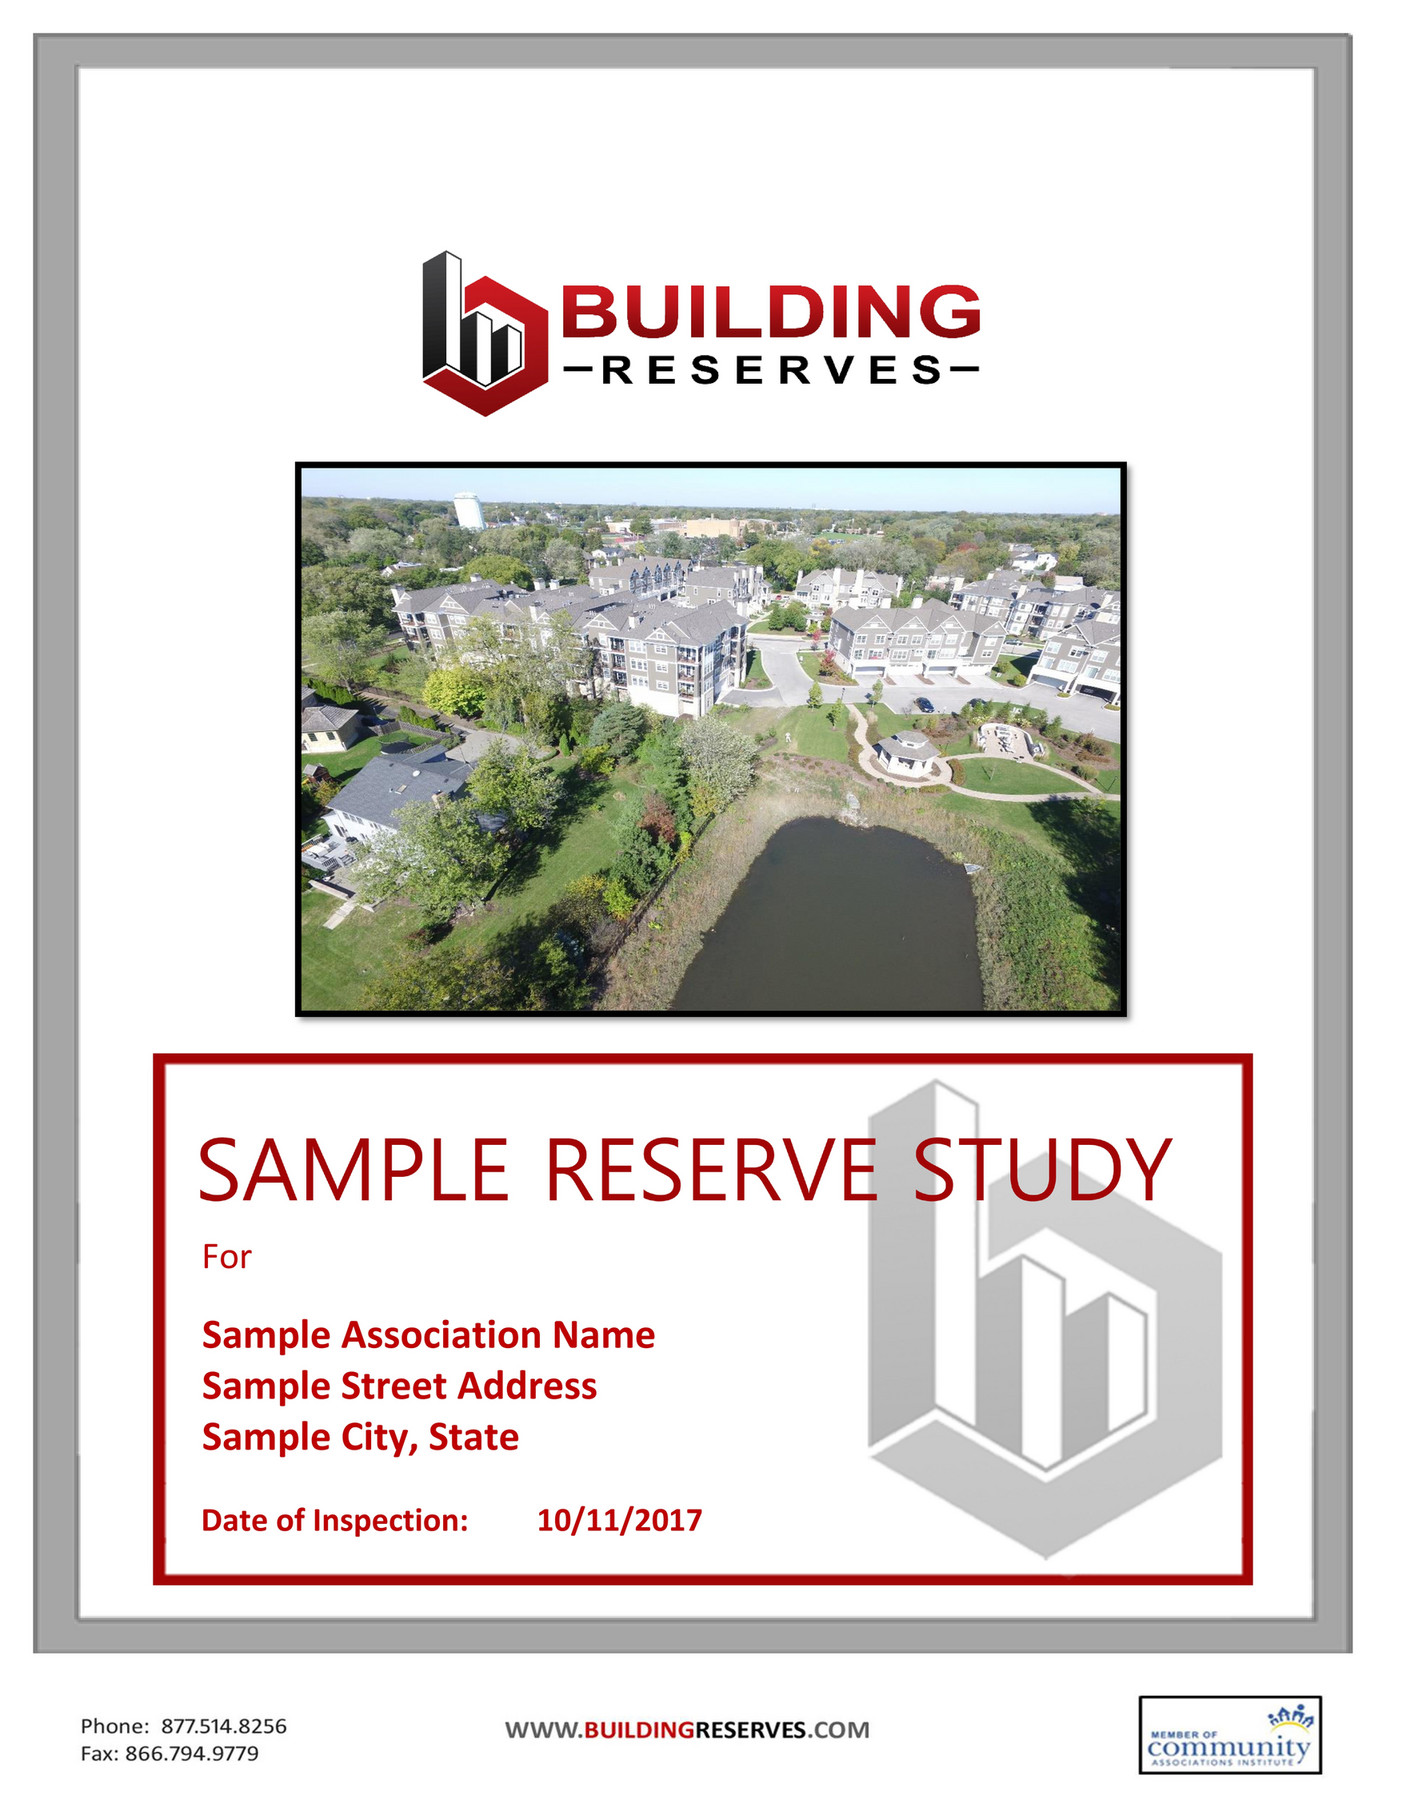 Building Reserves Inc Sample HOA Reserve Study Page 1 Created